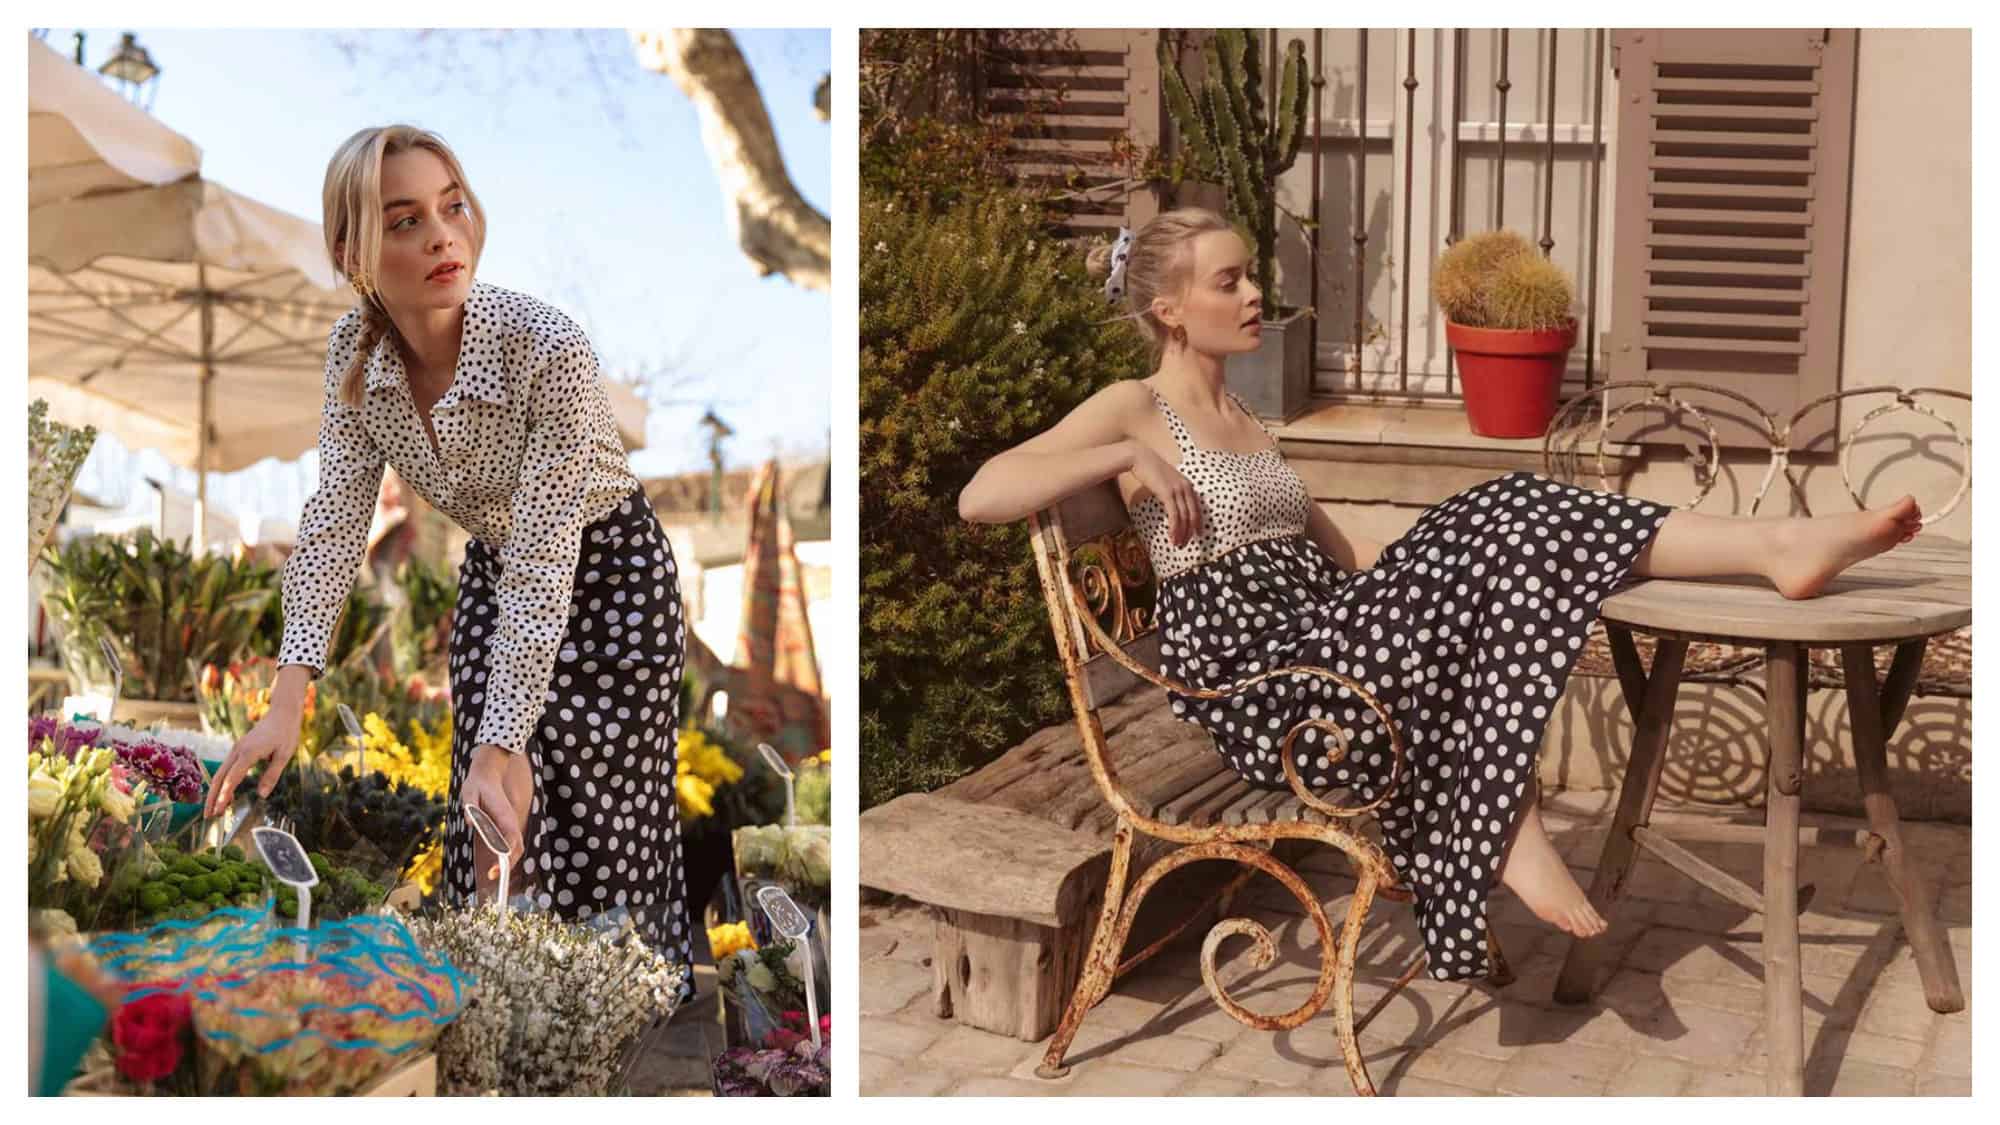 A woman wearing a polka dot white shirt and long polka dot skirt from influencer Jeanne Damas' French fashion brand Rouje, bending down to look at flowers at a market in Paris (left). The same woman wearing a white polka dot vest and long black polka dot skirt, sitting on an old wooden bench in the courtyard outside her apartment in Paris.